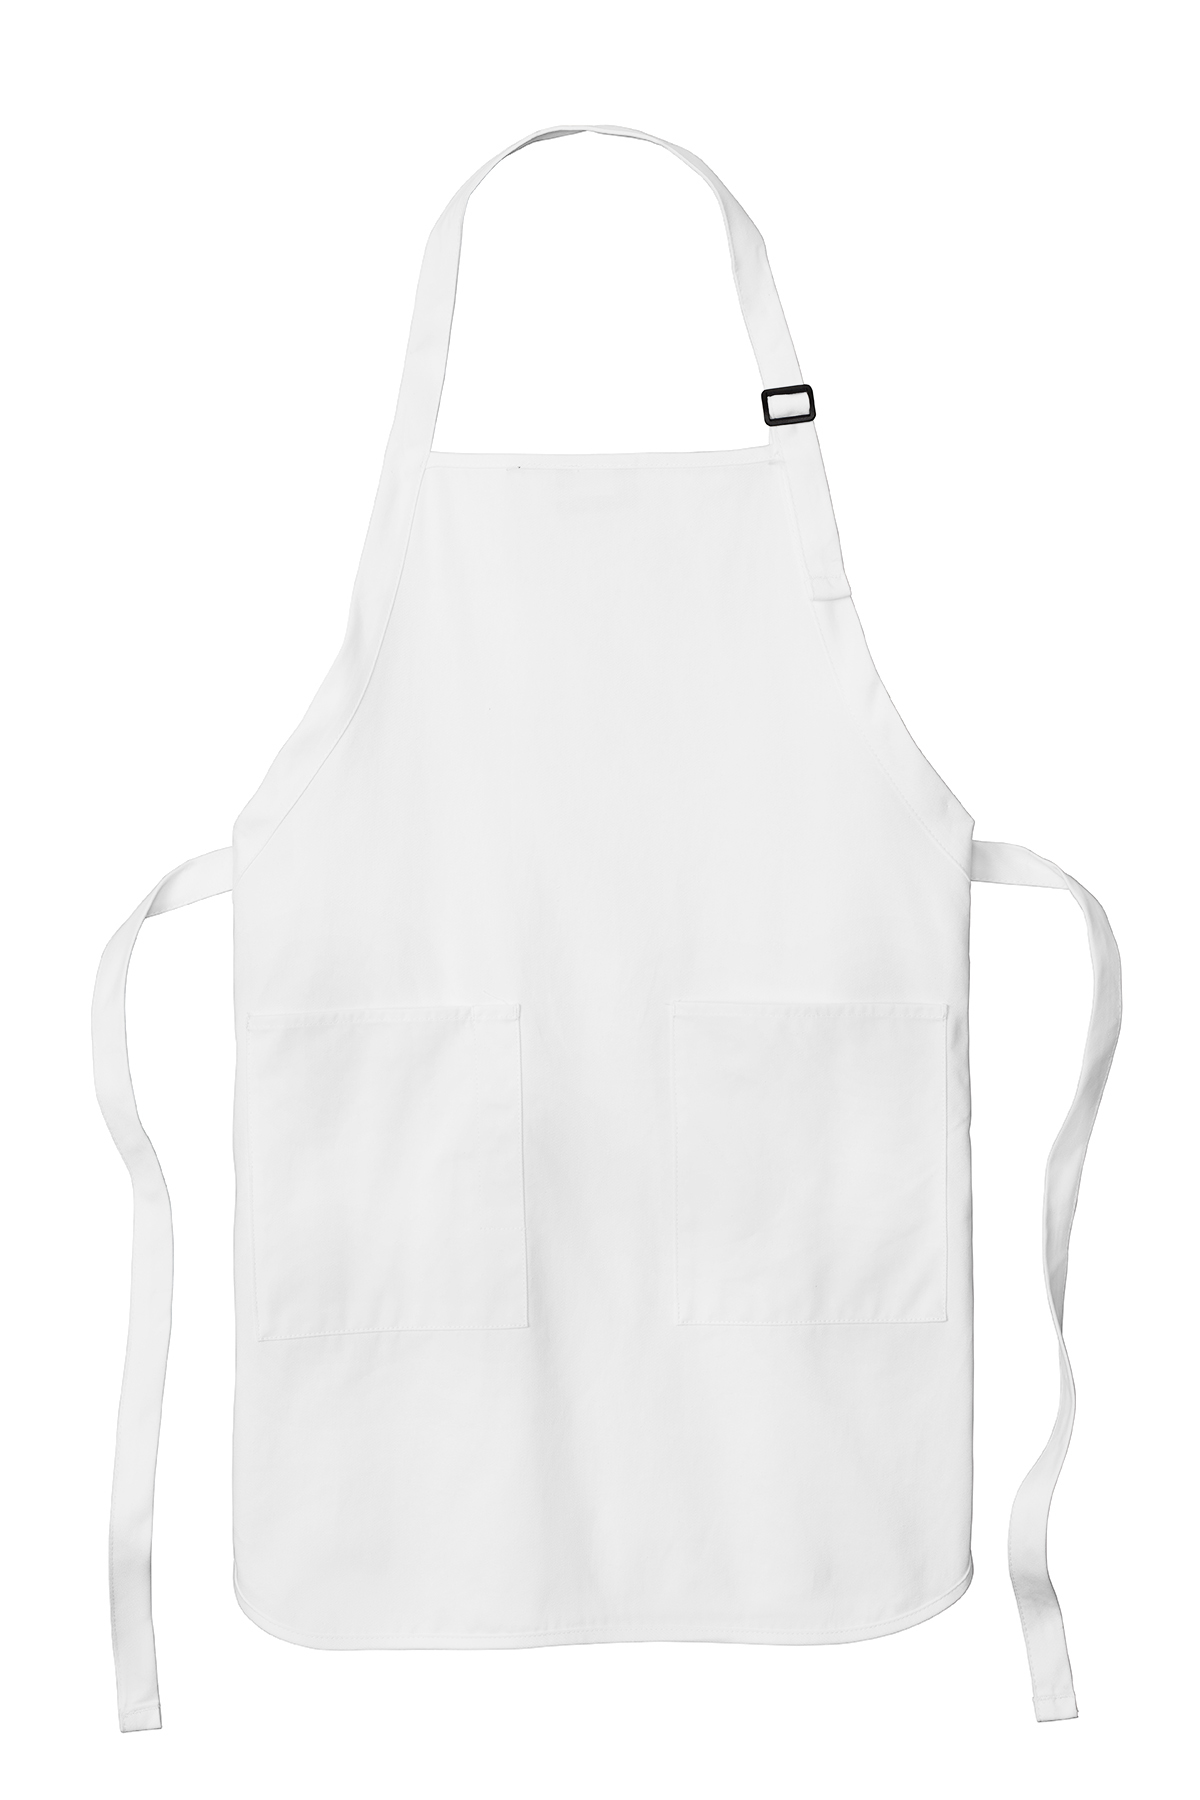 Port Authority Full-Length Apron with Pockets | Product | SanMar